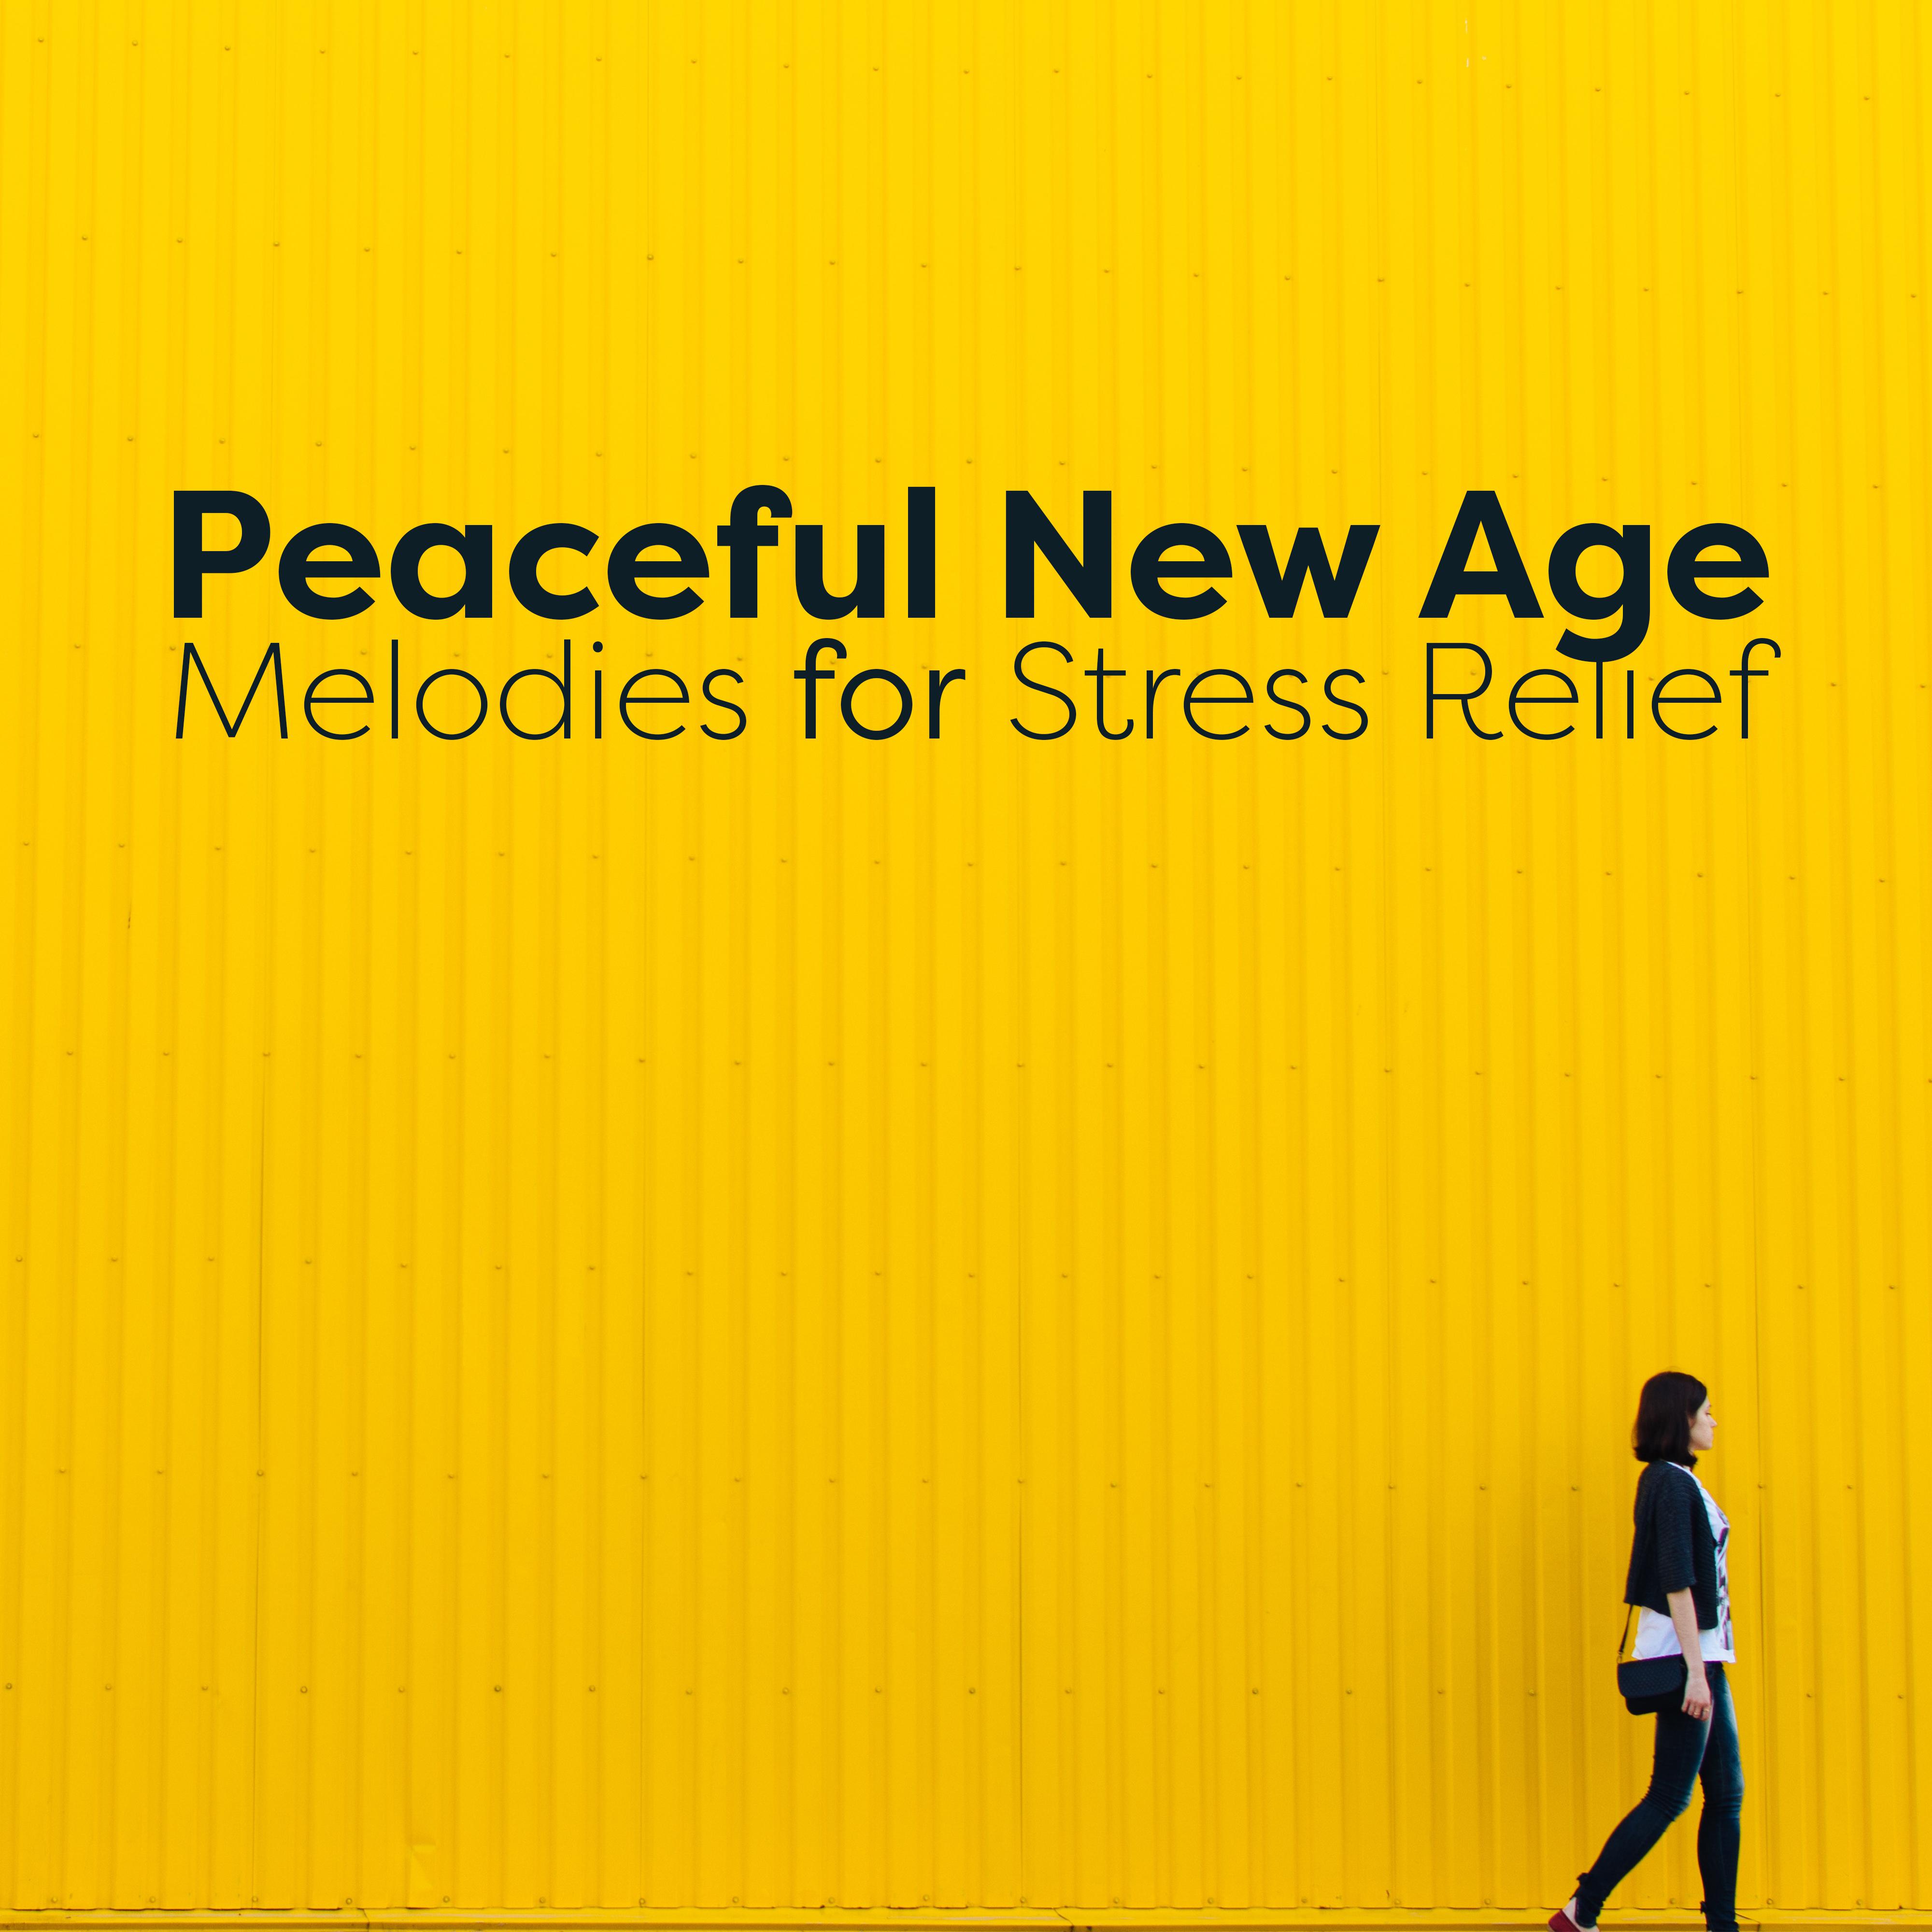 Peaceful New Age Melodies for Stress Relief